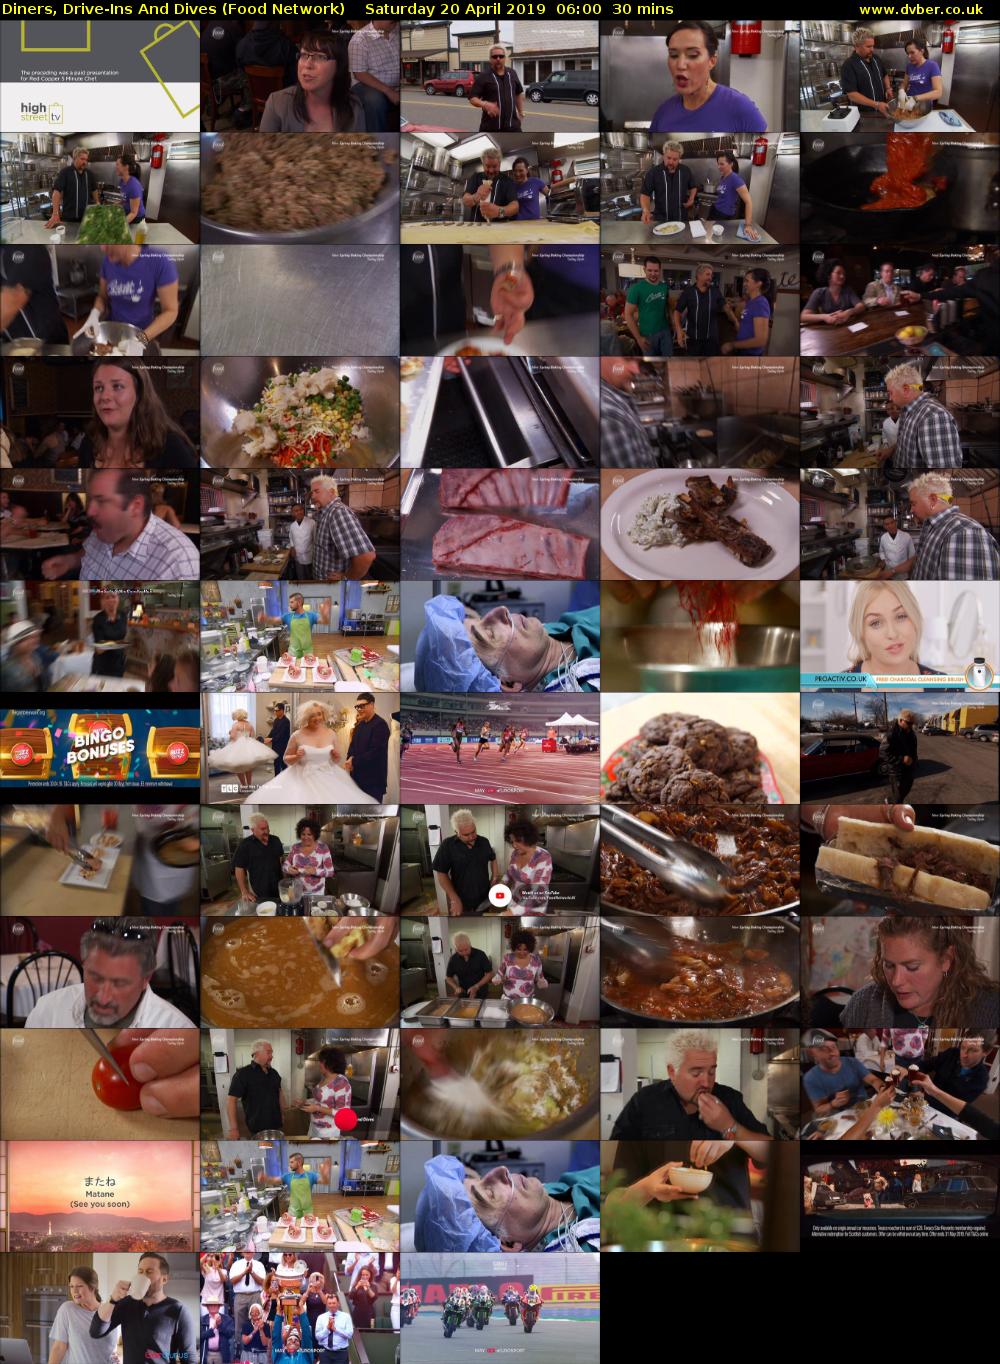 Diners, Drive-Ins And Dives (Food Network) Saturday 20 April 2019 06:00 - 06:30